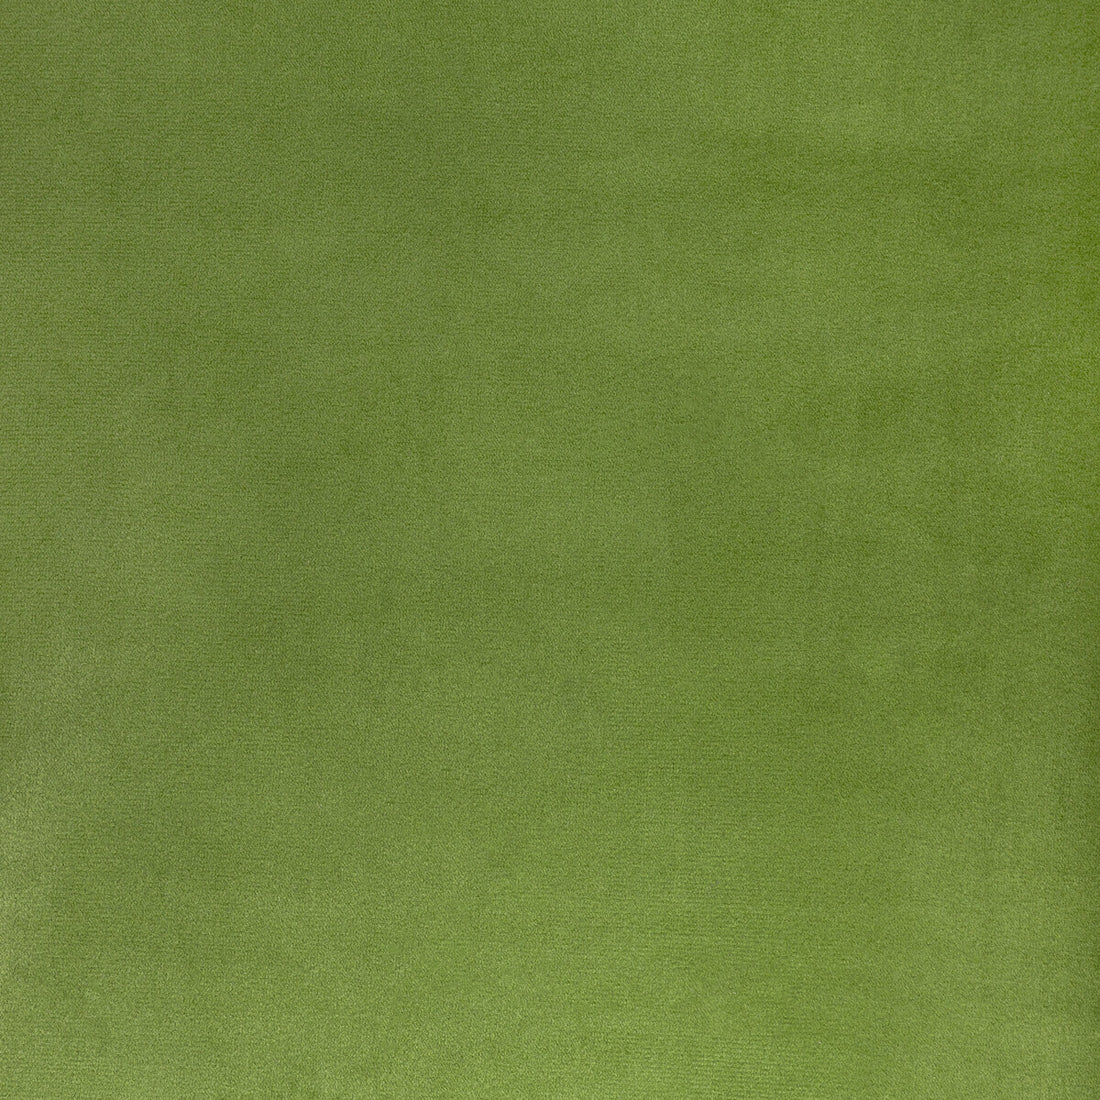 Rocco Velvet fabric in cactus color - pattern 36652.30.0 - by Kravet Contract